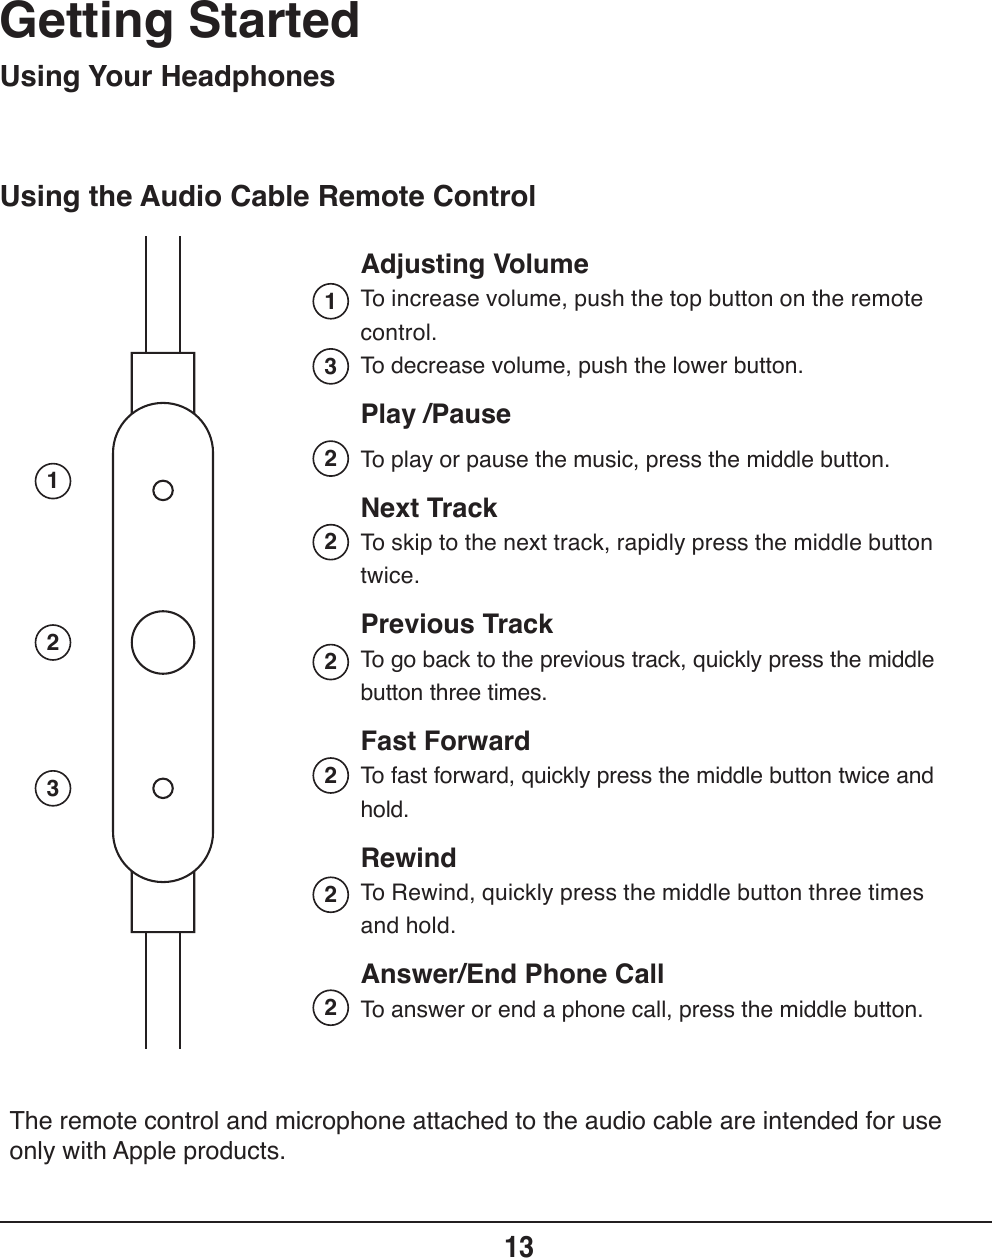 Using the Audio Cable Remote ControlGetting Started13Adjusting VolumeTo increase volume, push the top button on the remote control.To decrease volume, push the lower button.Play /PauseTo play or pause the music, press the middle button.Next TrackTo skip to the next track, rapidly press the middle button twice.Previous TrackTo go back to the previous track, quickly press the middle button three times.Fast ForwardTo fast forward, quickly press the middle button twice and hold.RewindTo Rewind, quickly press the middle button three times and hold.Answer/End Phone CallTo answer or end a phone call, press the middle button.Using Your Headphones12313222222The remote control and microphone attached to the audio cable are intended for use only with Apple products.